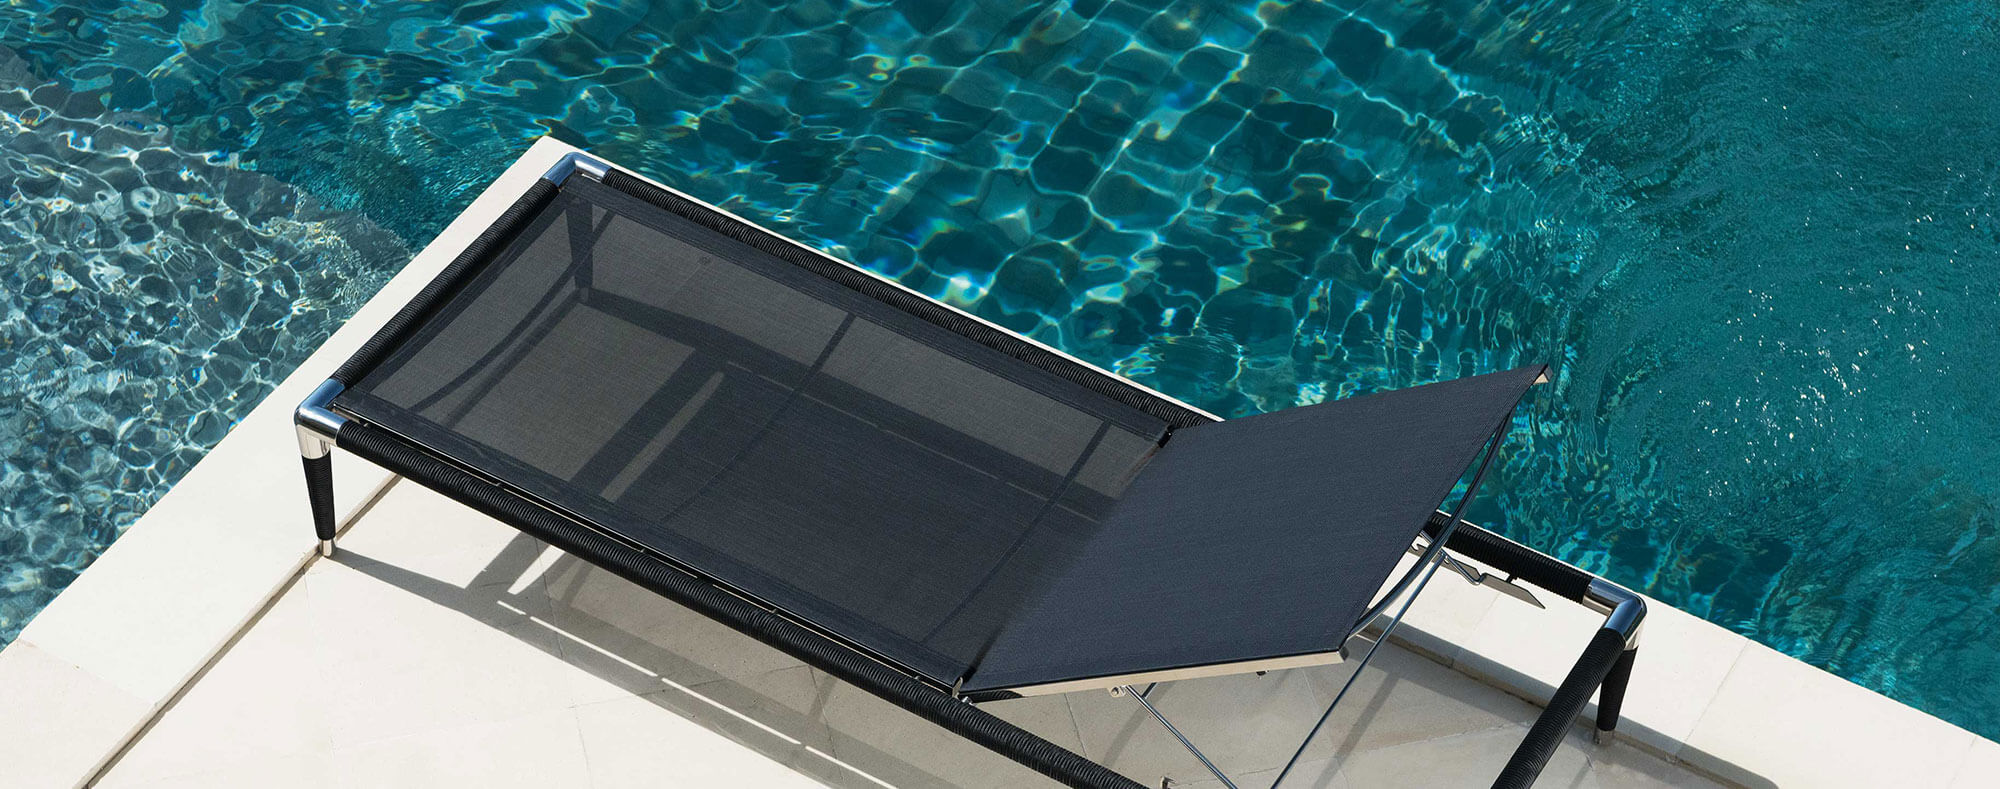 Luxury Marina Lounger, Electro-polished Stainless Steel sun lounger